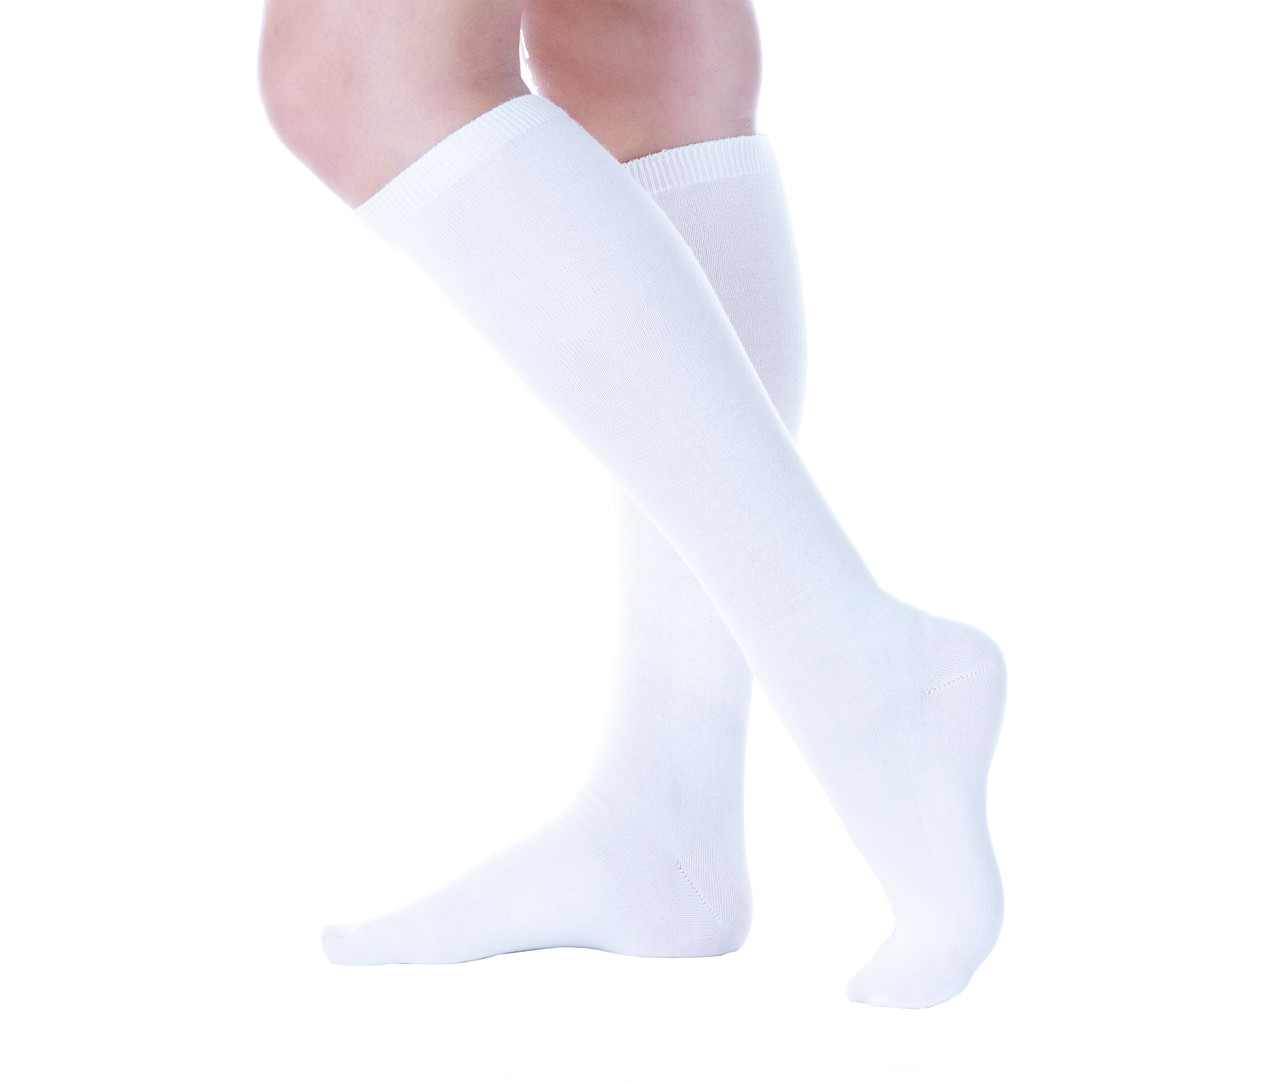 https://cdn11.bigcommerce.com/s-k6hxfbd18e/images/stencil/1280x1280/products/318/3927/Socks_White_SK10129_mortissed_retouched_7.5x6.4tall_Wearever_3-4-19__14204.1558943360.jpg?c=2